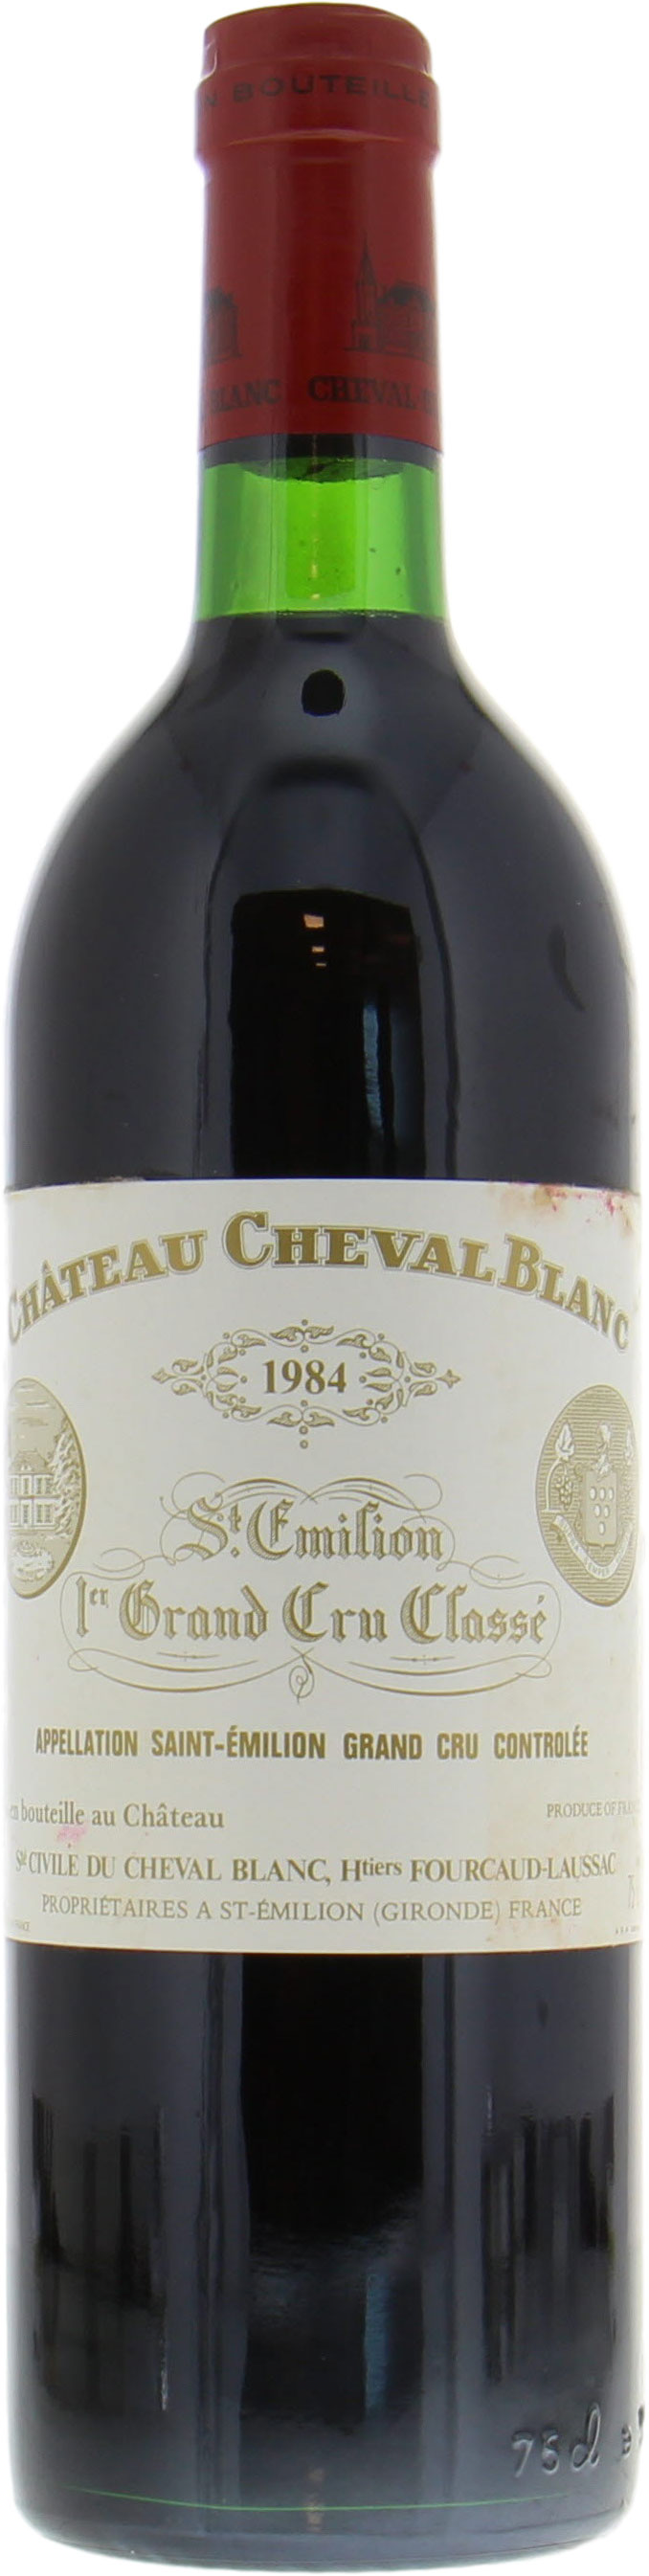 Chateau Cheval Blanc - Chateau Cheval Blanc 1984 From Original Wooden Case